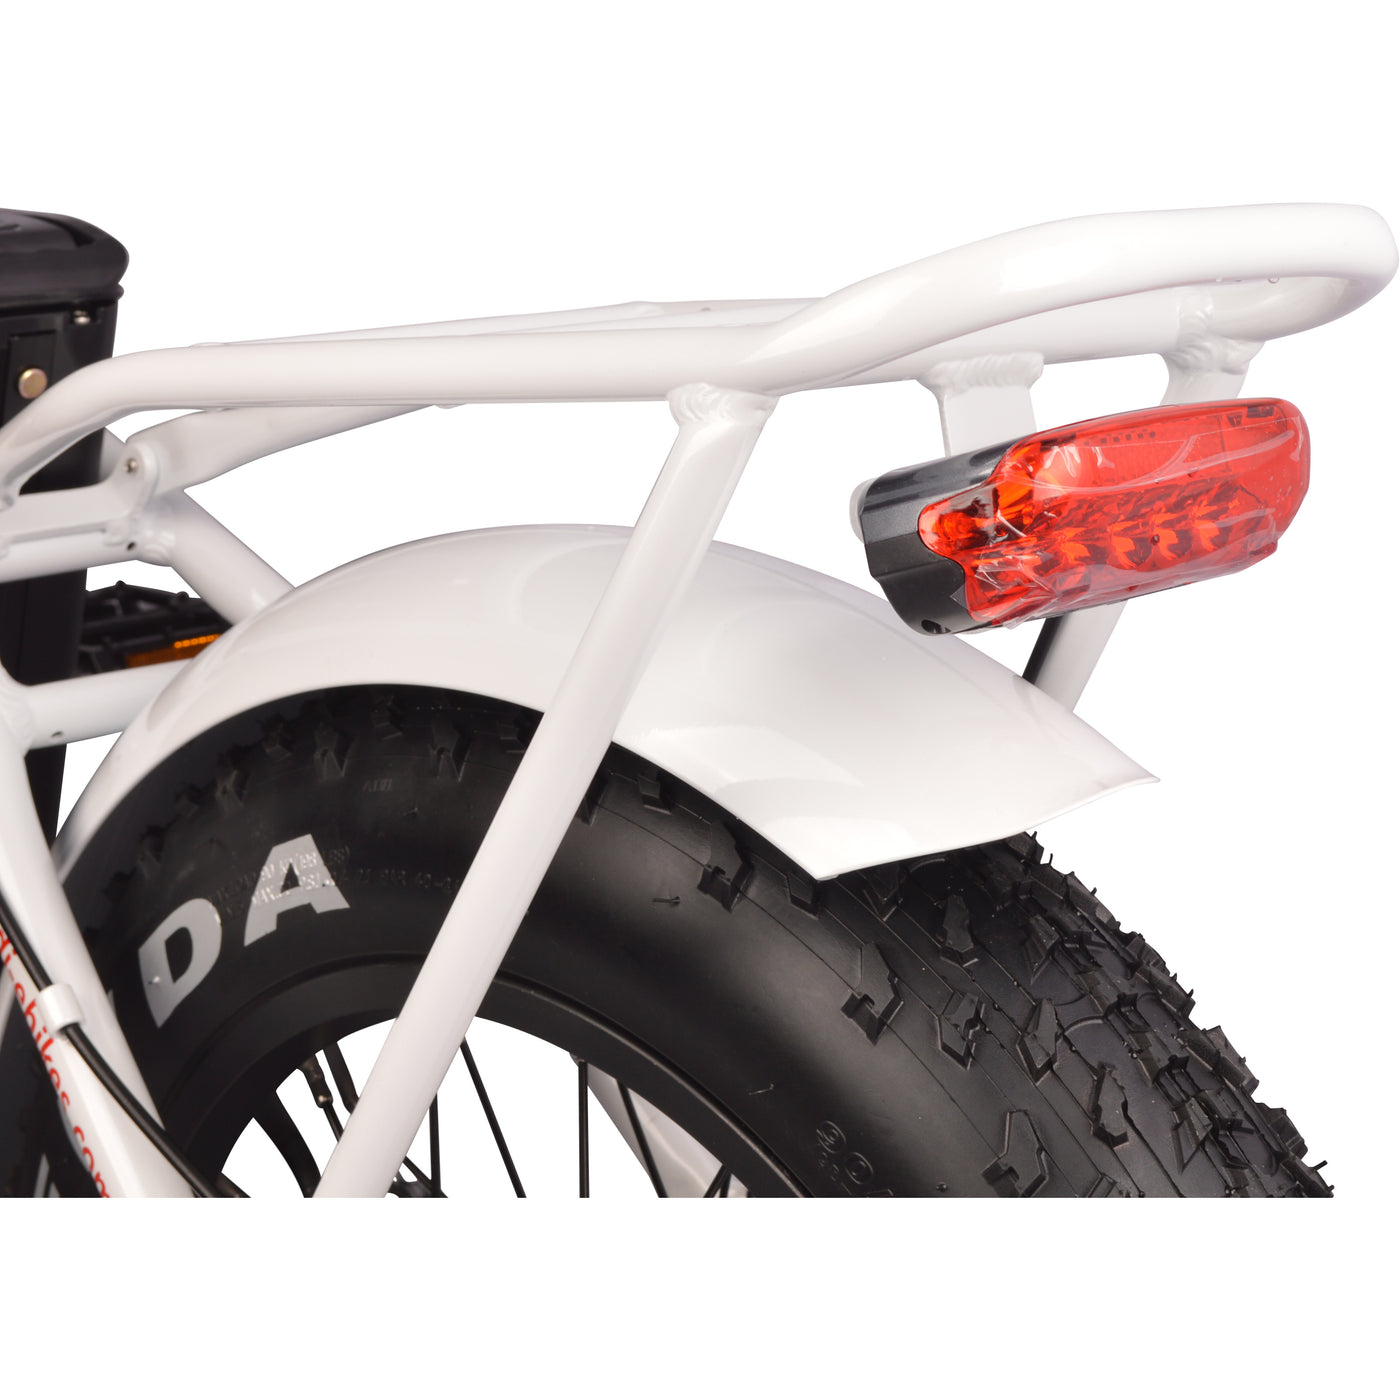 DJ Folding Bike Step Thru includes a rear rack with integrated tail light